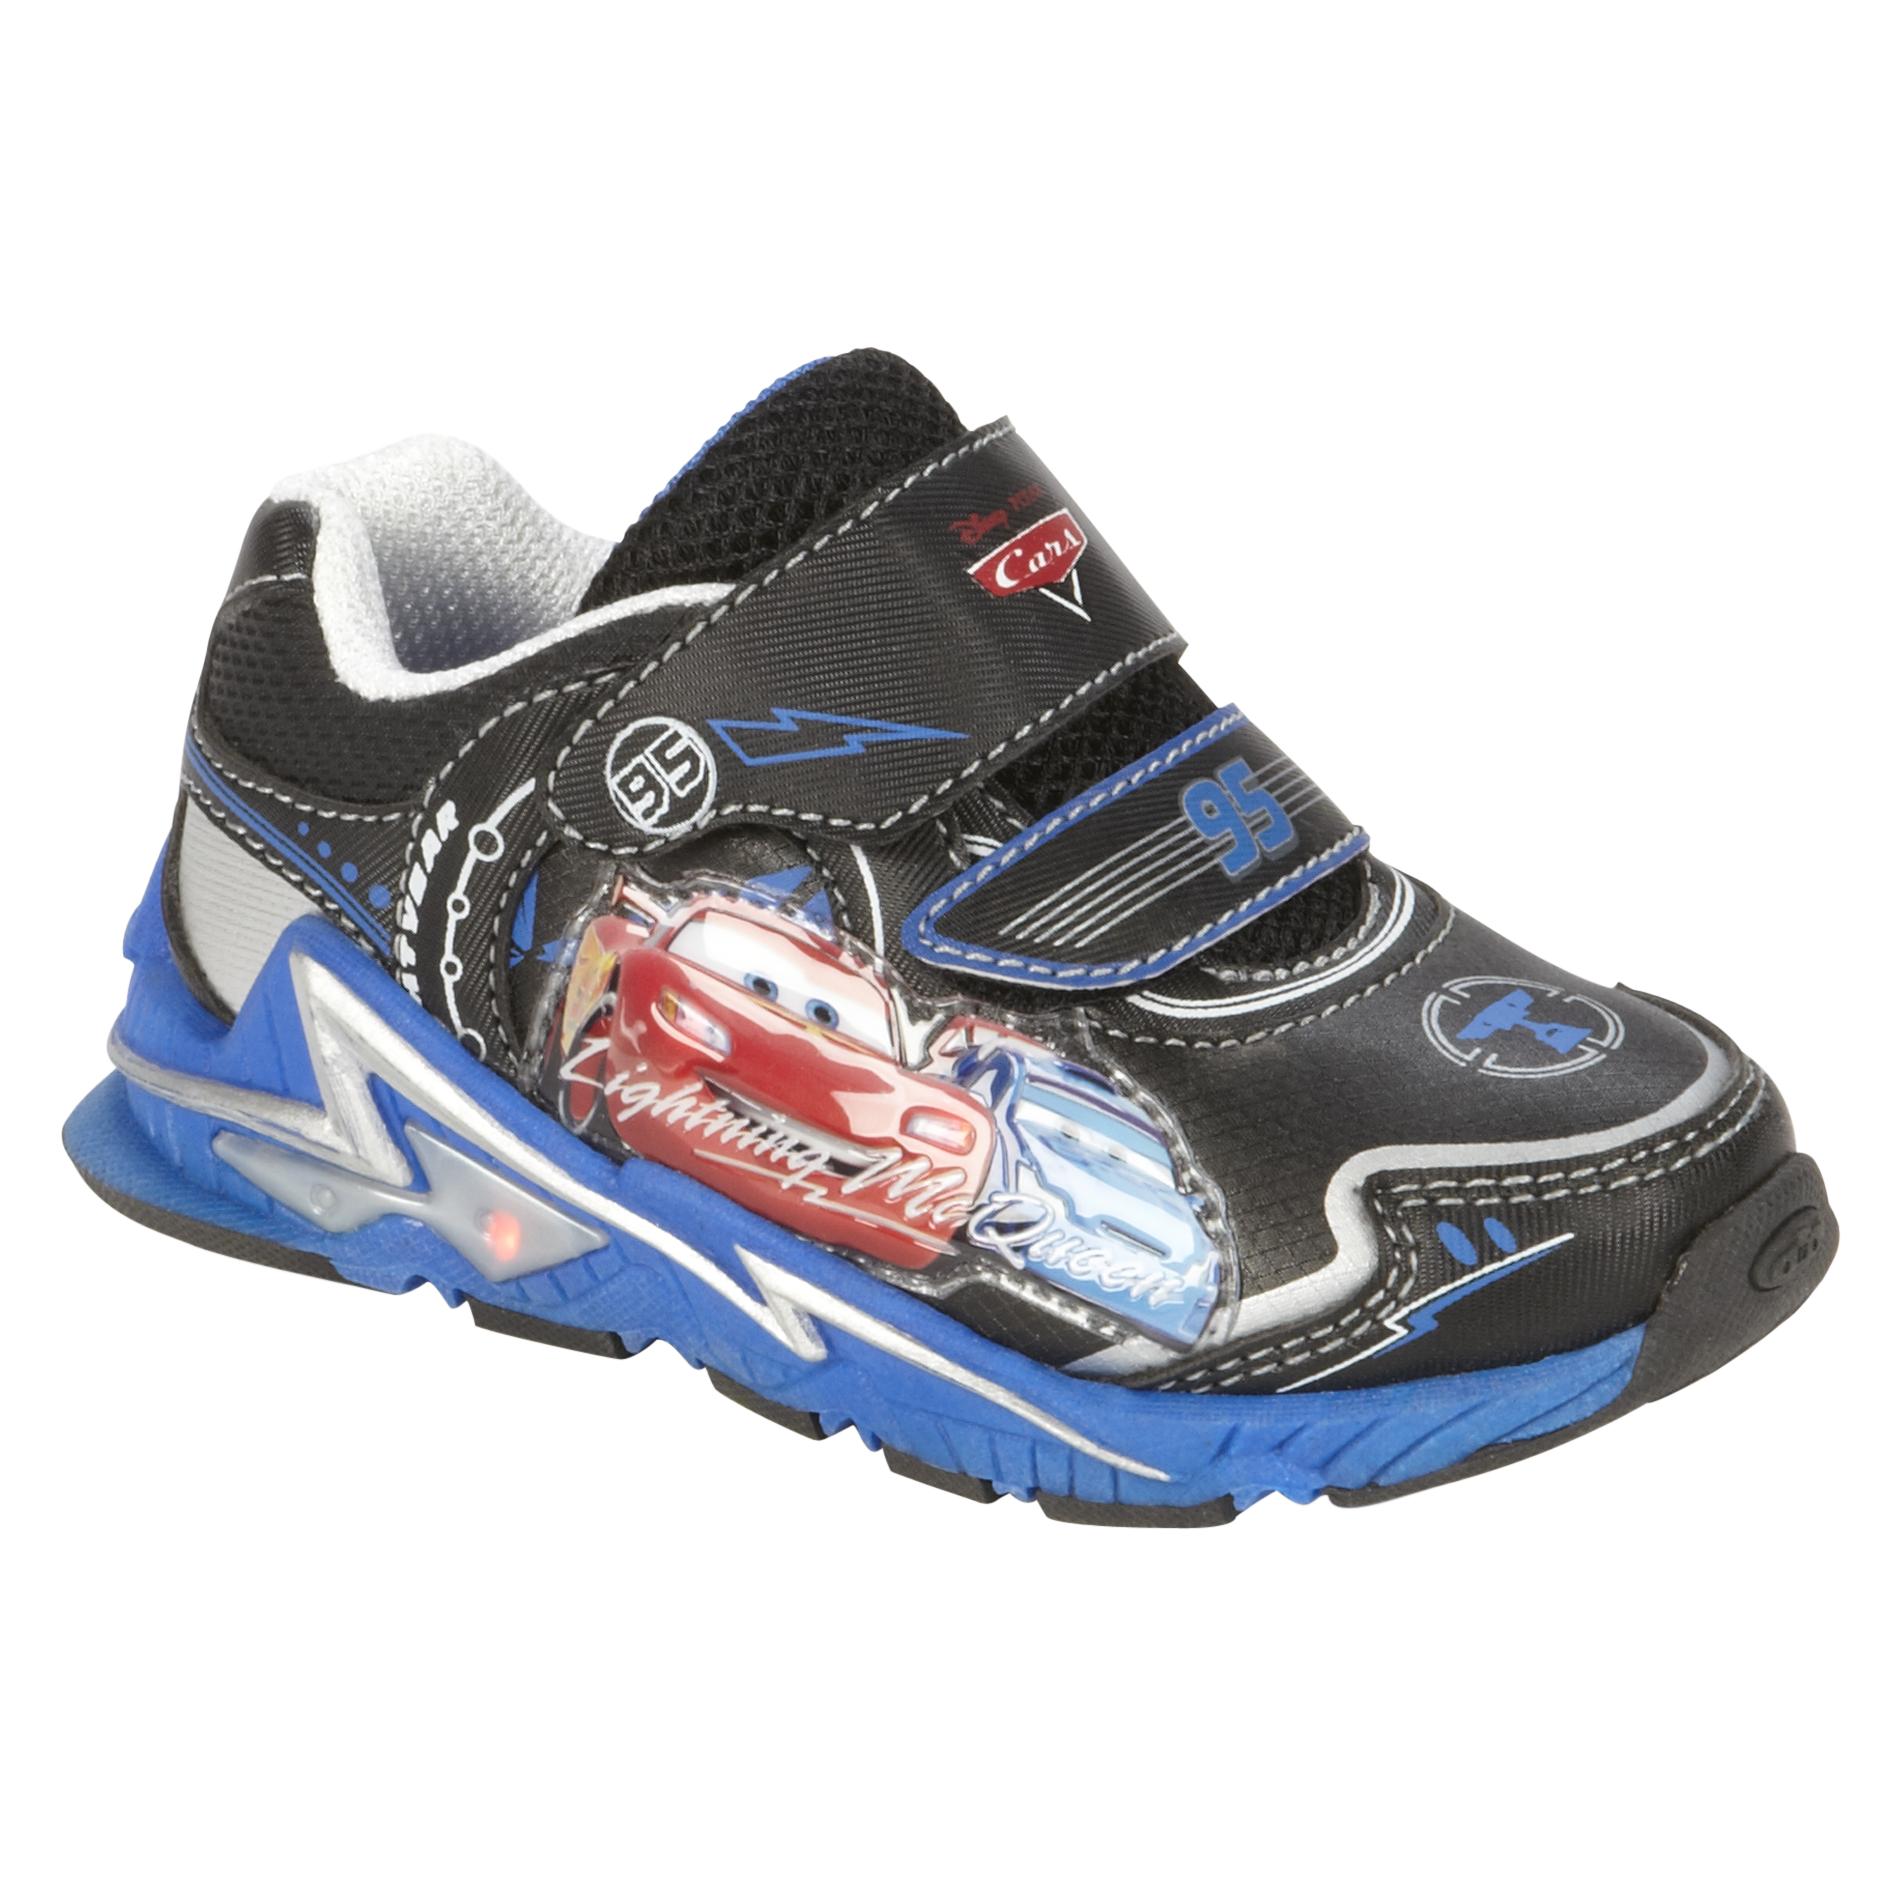 Disney Boy's Cars Blue and Black Light-Up Sneakers